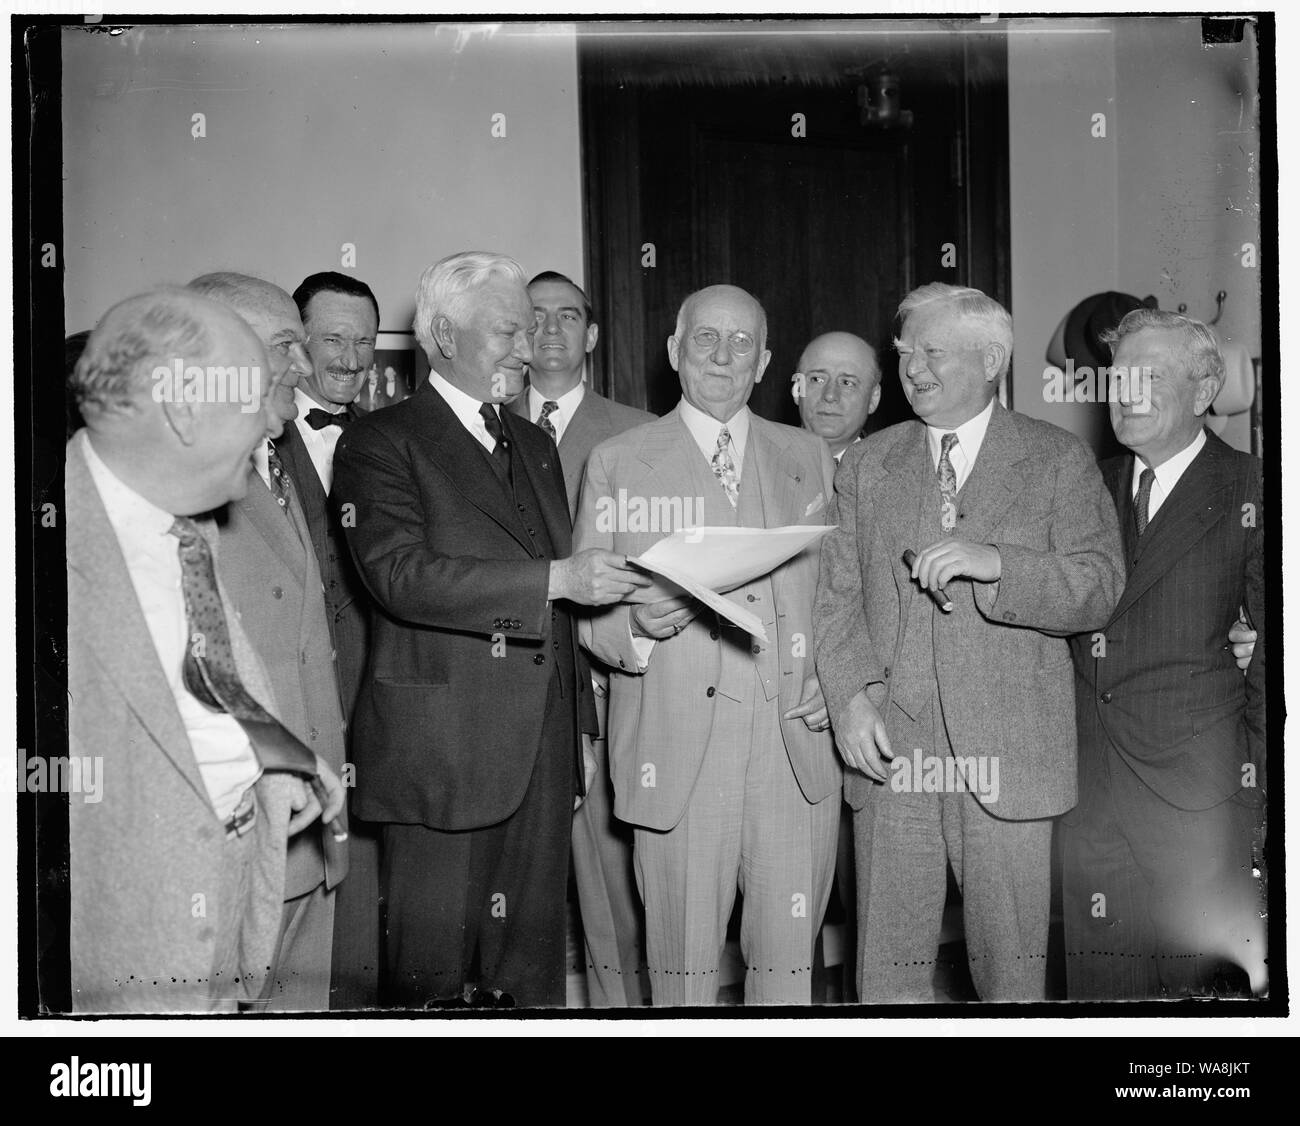 Canadian named official of Dallas exposition. Washington, D.C., May 5. Vice President Garner today presented Capt. J.W. Flanagan, Texas millionaire and Canadian sportsman, with the Commission of Director General of Foreign participation for the Pan American exposition to be held at Dallas this summer. Capt. Flanagan will sail May 8 for Colombia where he will begin a tour of South America to interest Latin-American sportsmen in raising funds to bring Latin athletes to Dallas for the Inter-American Sports Show. In the photograph, left to right: Roy Miller, of Houston; Rep. Albert Thomas, of Texa Stock Photo